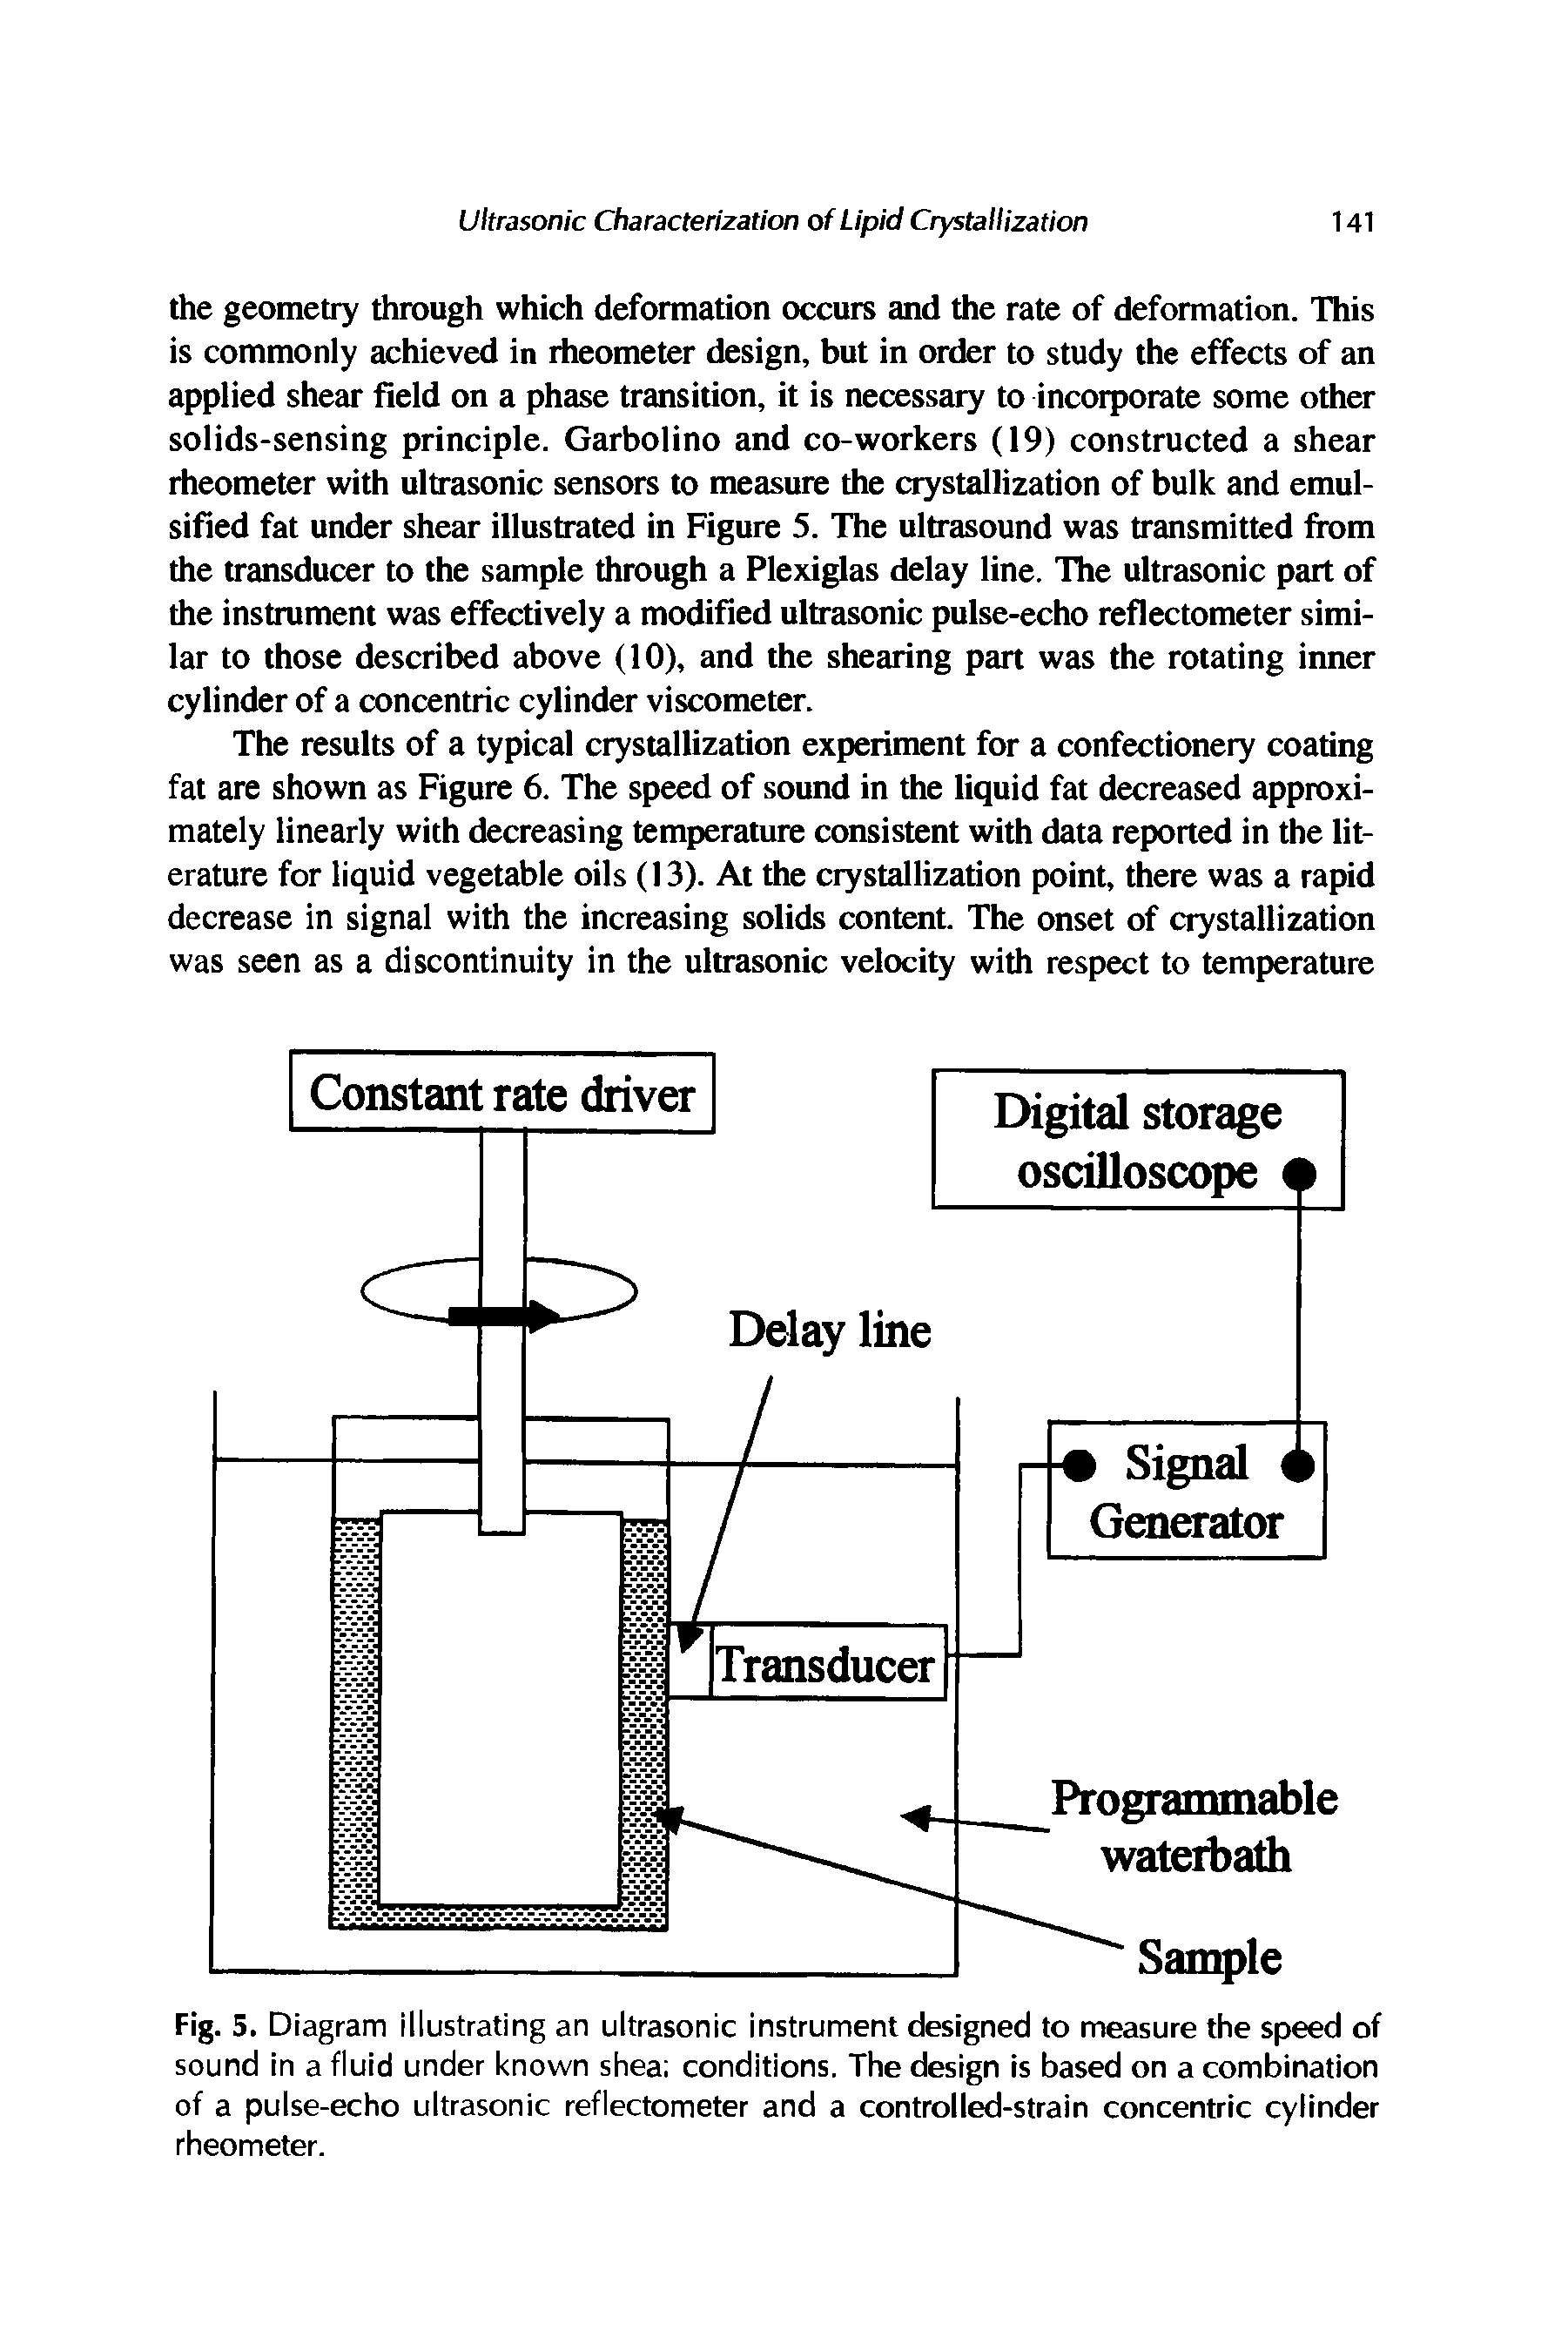 Fig. 5. Diagram illustrating an ultrasonic instrument designed to measure the speed of sound in a fluid under known shea conditions. The design is based on a combination of a pulse-echo ultrasonic reflectometer and a controlled-strain concentric cylinder rheometer.